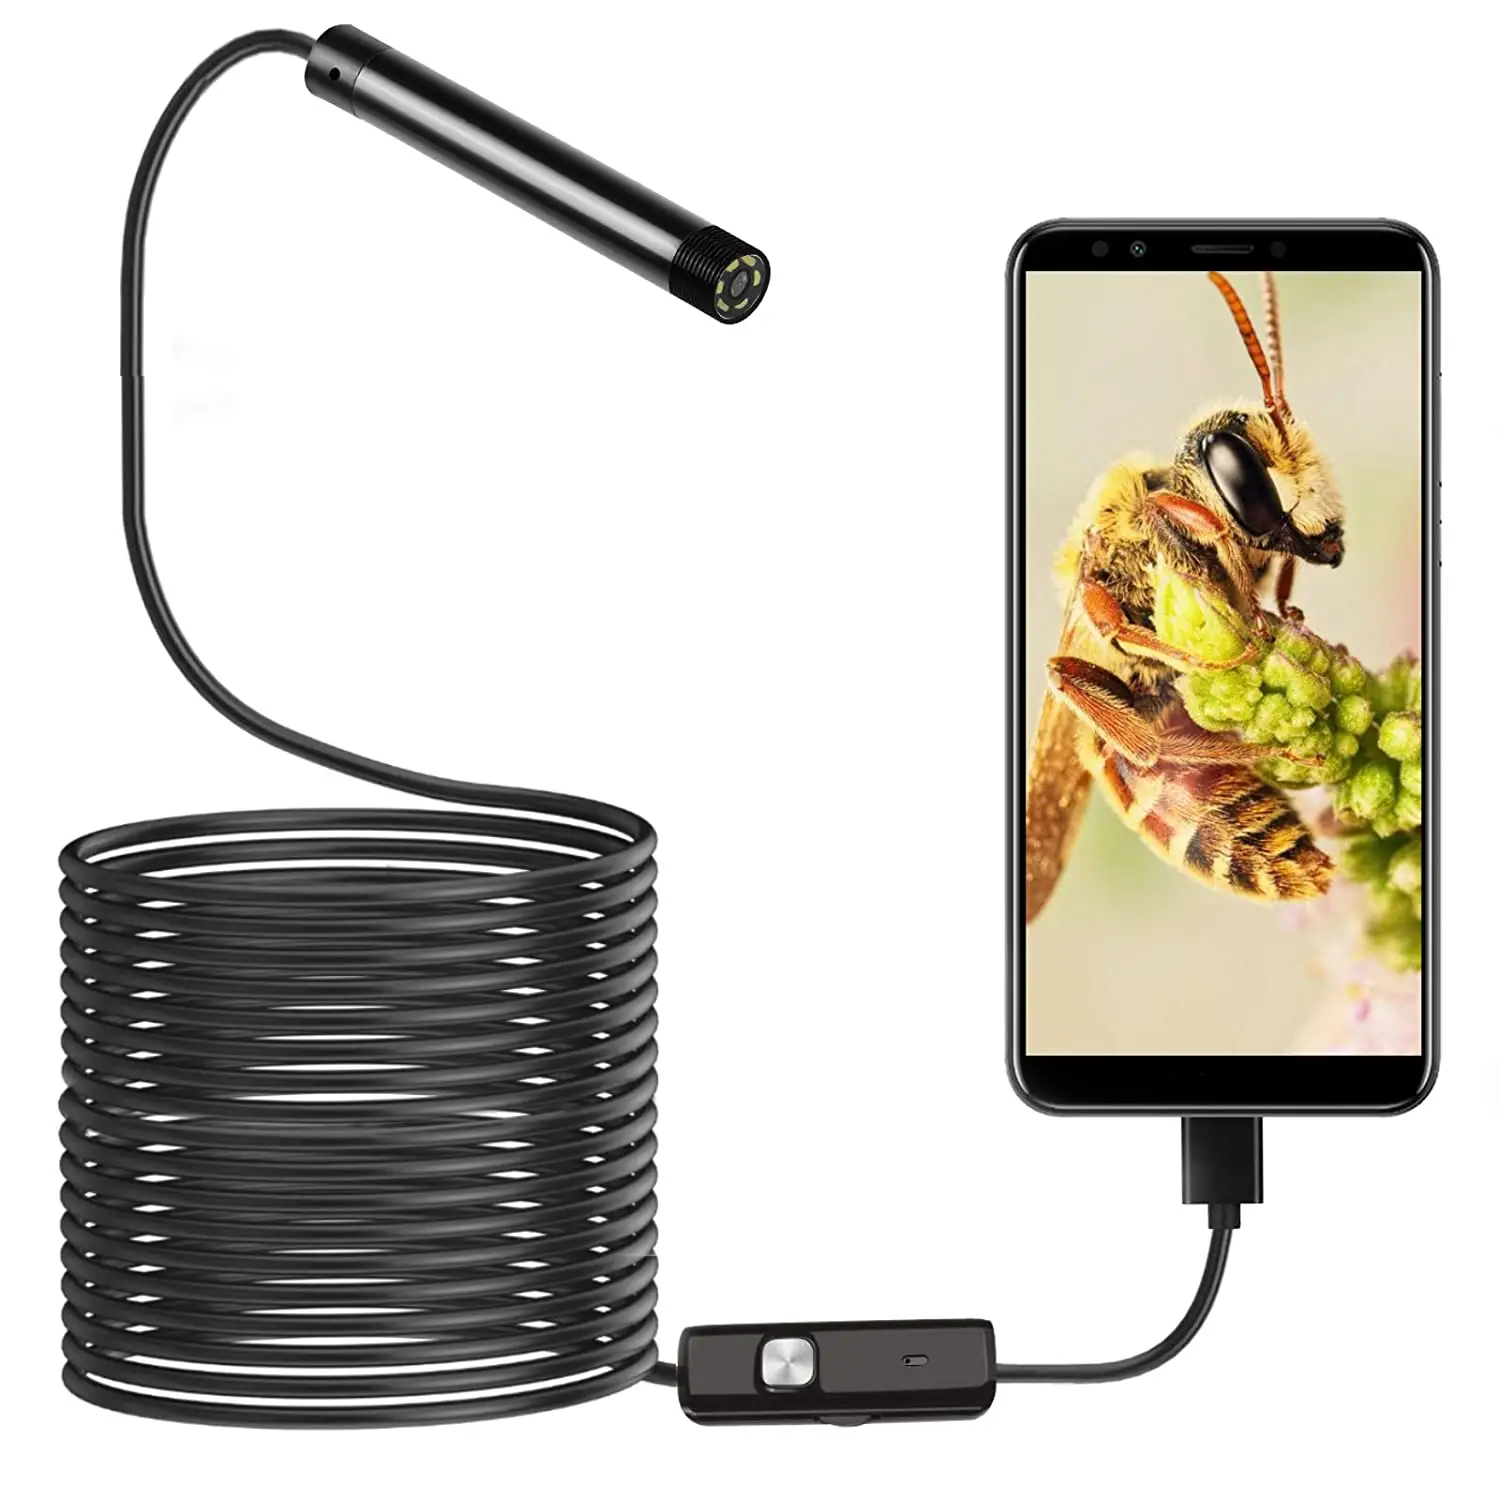 480P 7mm 1m Hard Cable Industrial Endoscope IP67 Waterproof 3 in 1 Driver USB Endoscope Camera Portable for android and pc